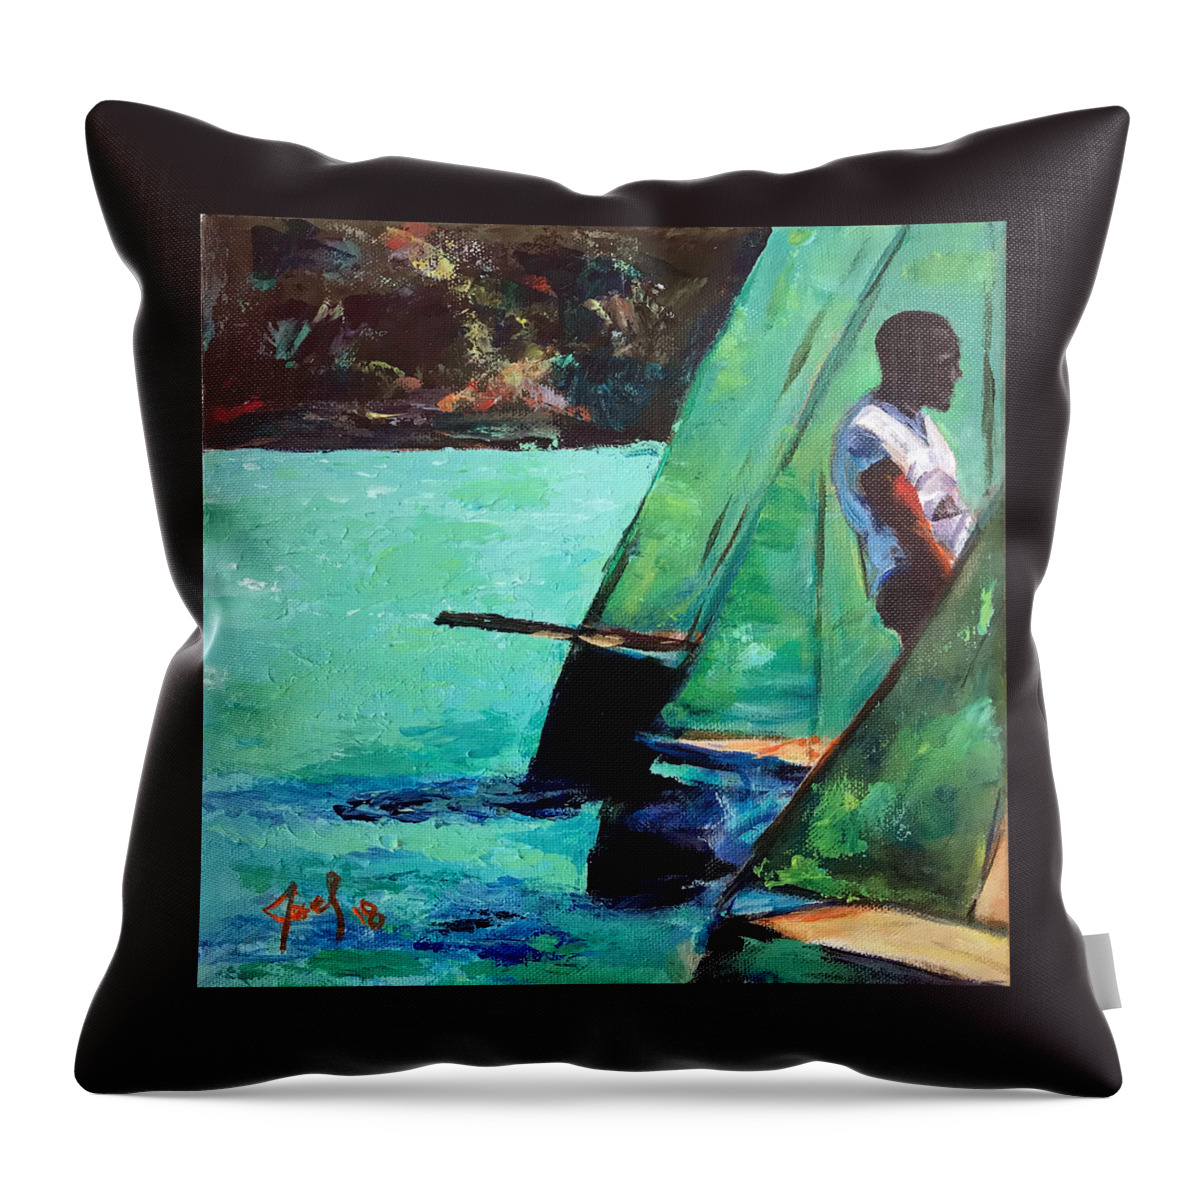 Bahamas Throw Pillow featuring the painting Race Day by Josef Kelly